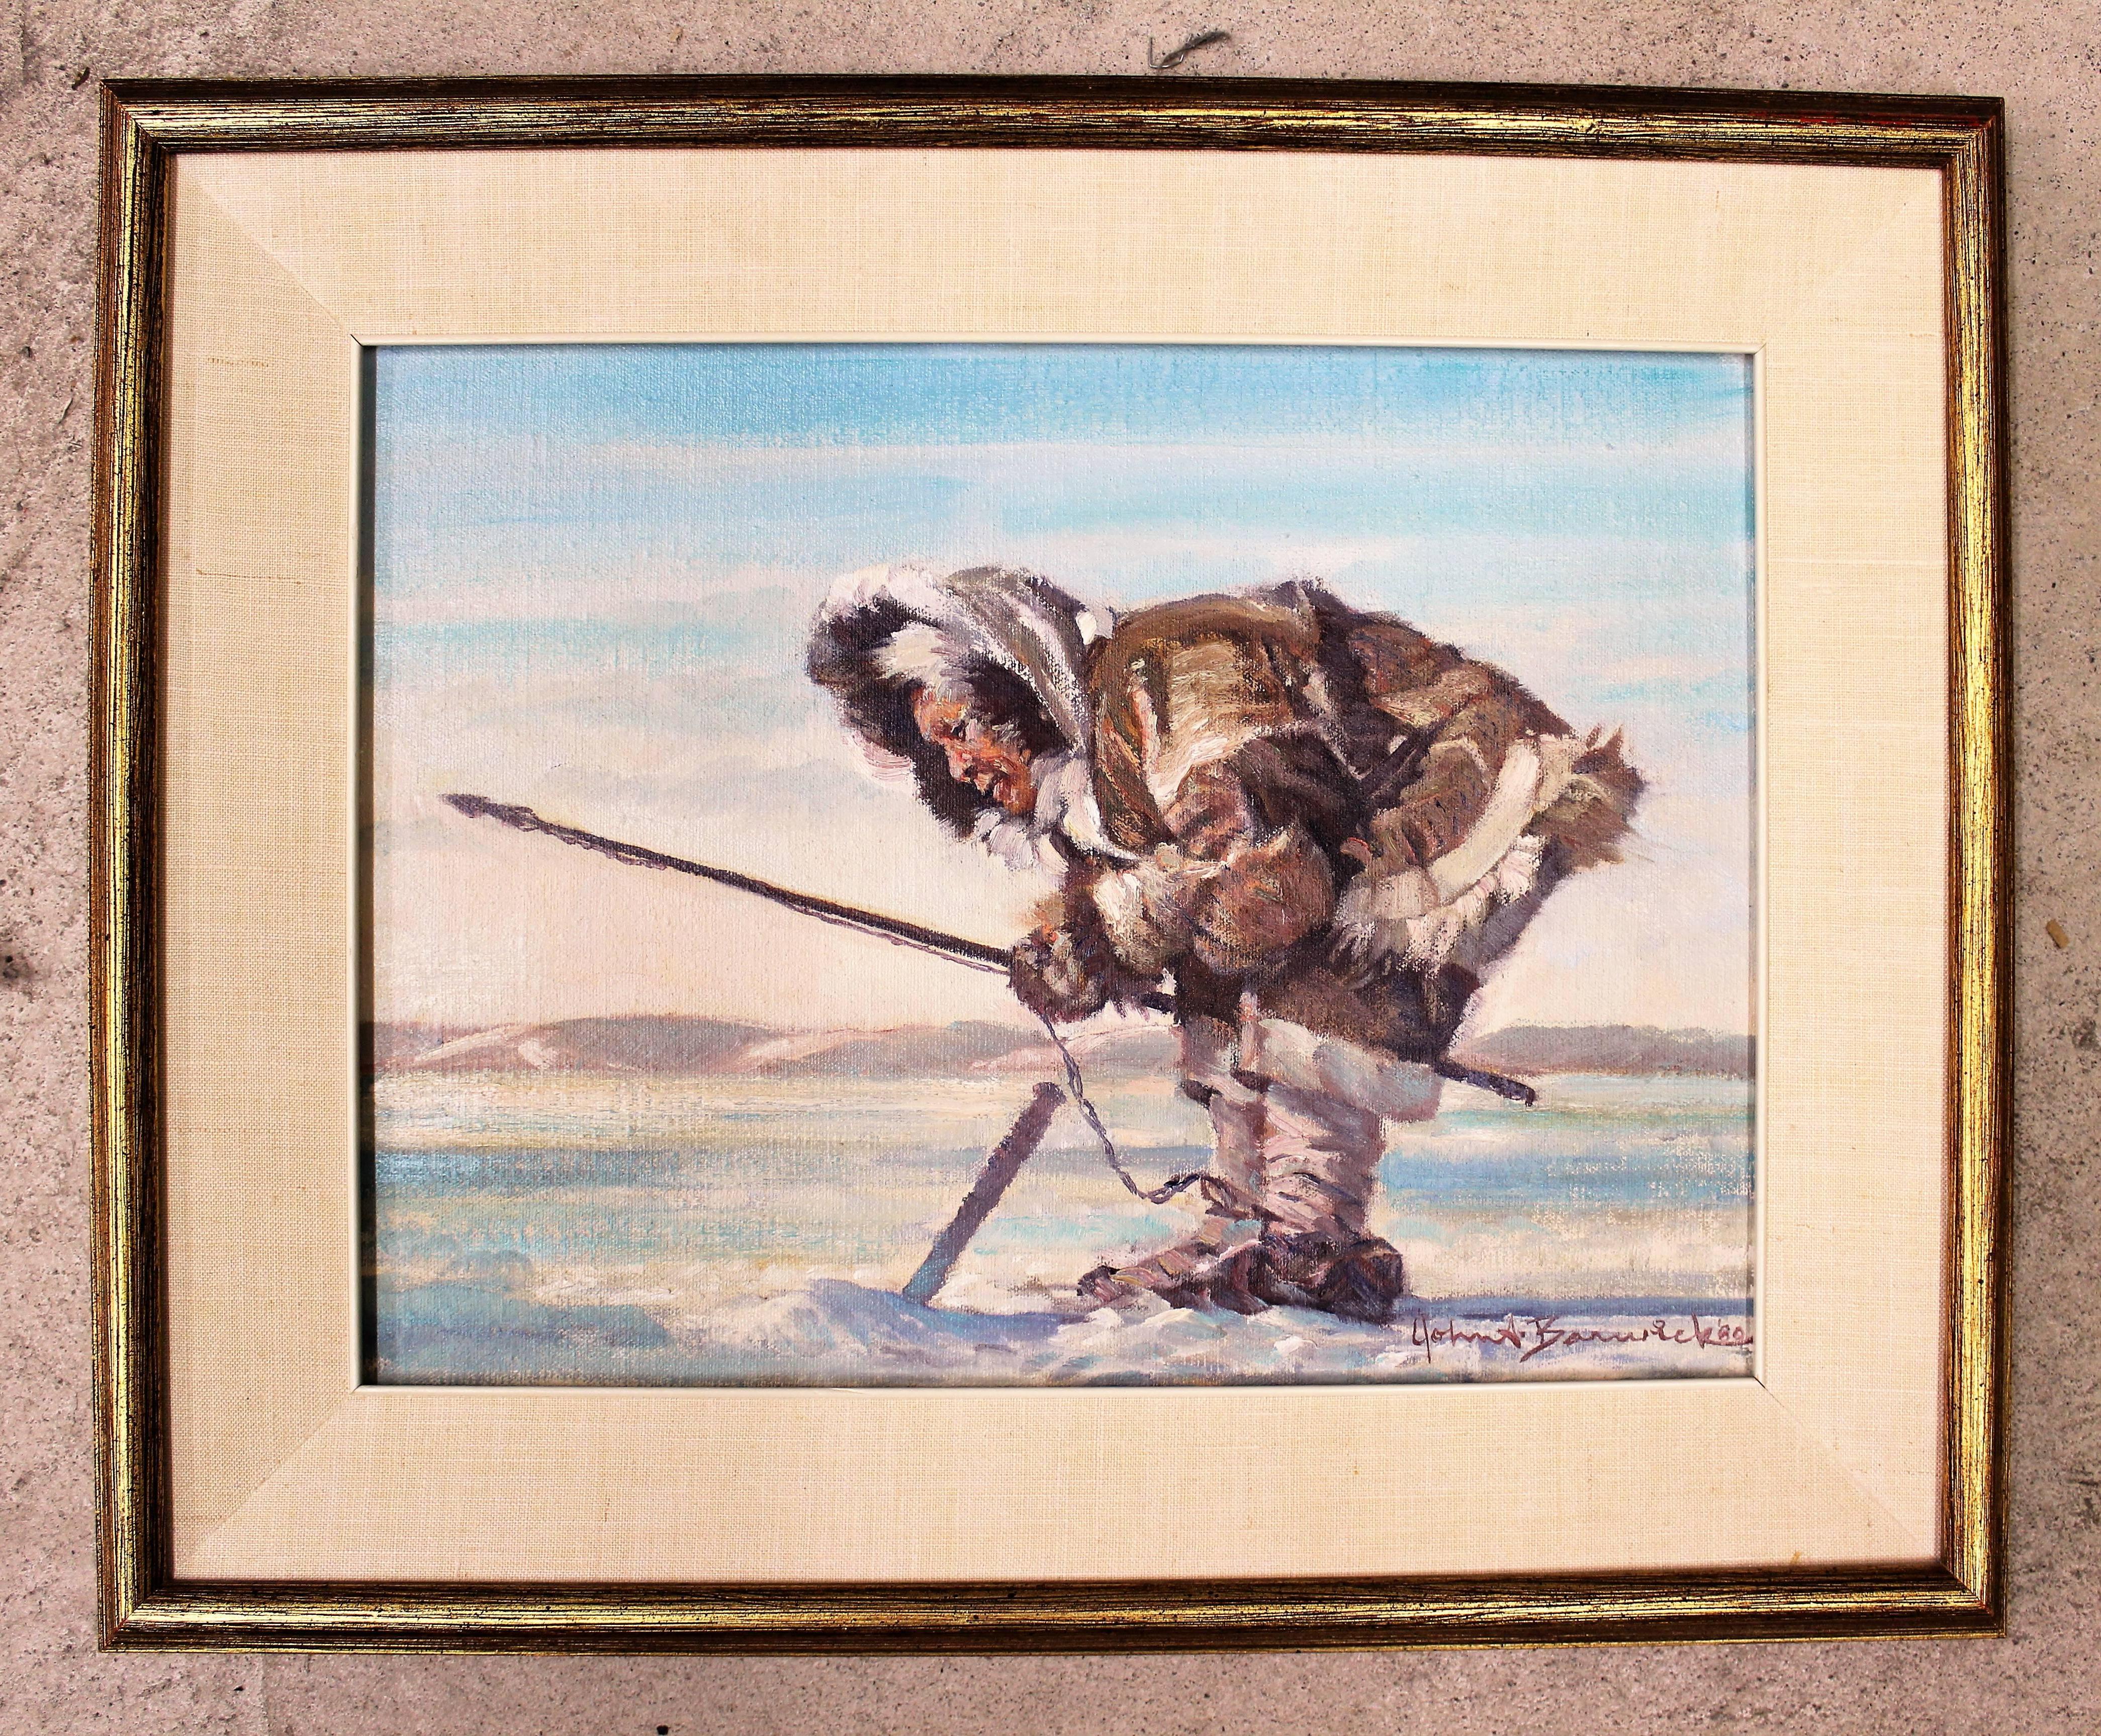 John Alfred Barwick oil painting (Canadian born 1912)
Titled: 'Patienter' (the seal breathing hole)
Location: Pond Inlet - Baffin Island

Size without frame: 12" high x 18" wide
Size with frame: 17 3/4" high x 21 3/4" wide.